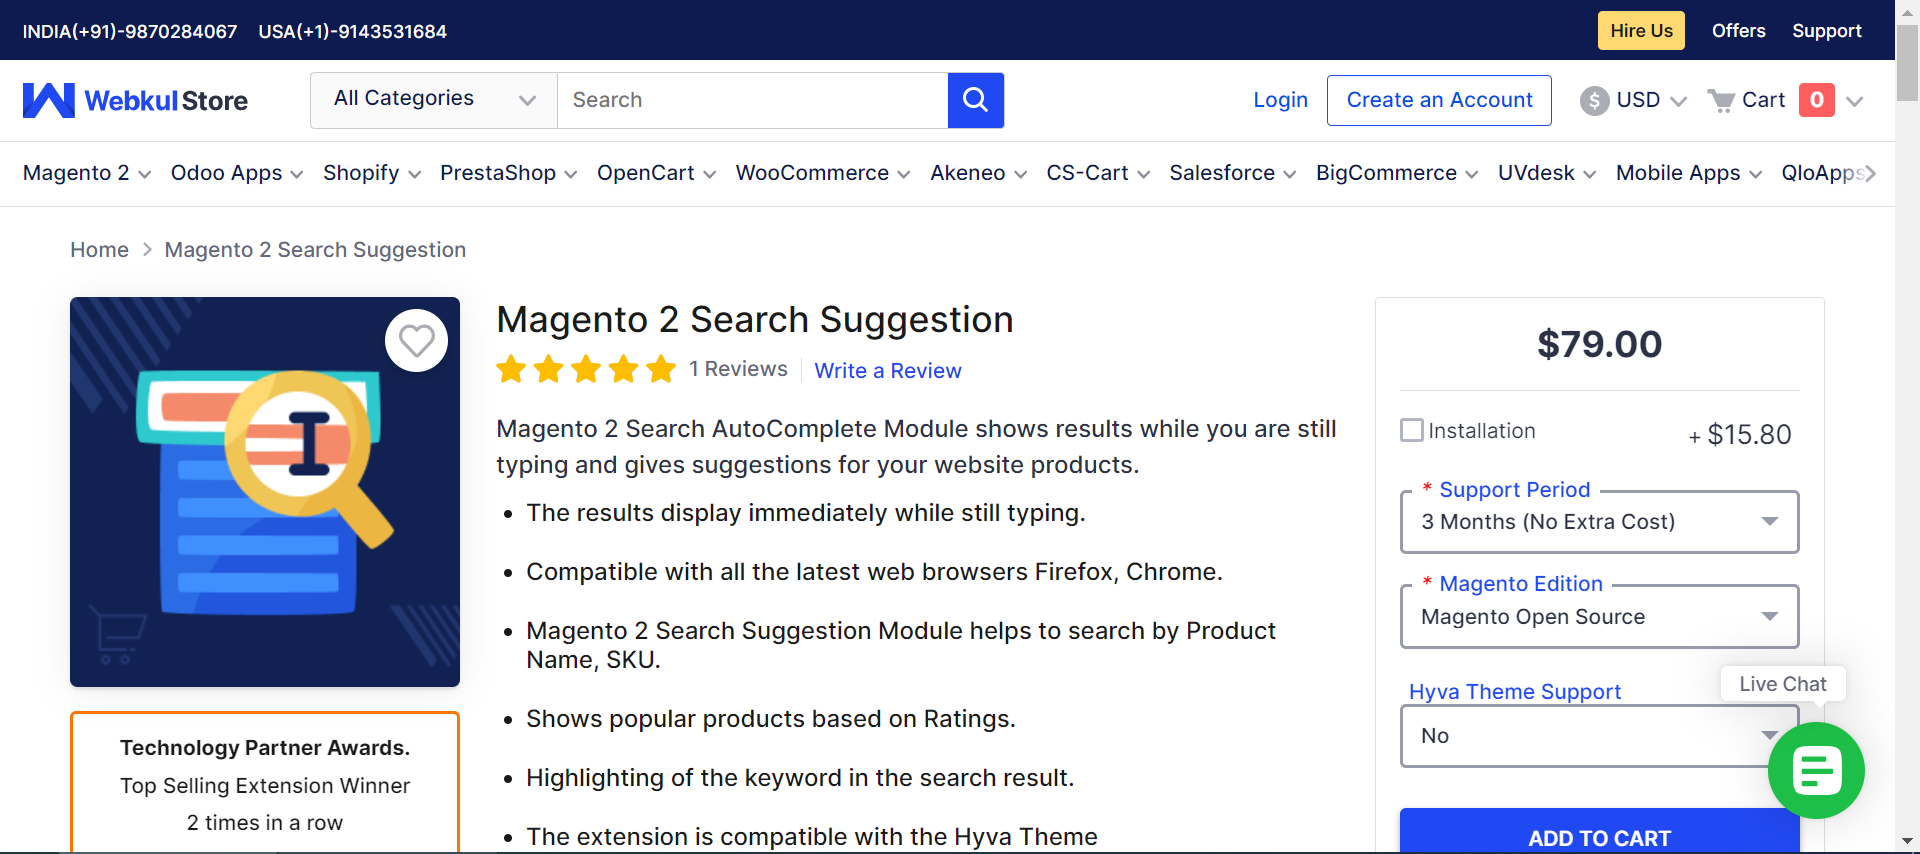 Magento SEO Extension - Webkul Magento 2 Search Suggestion